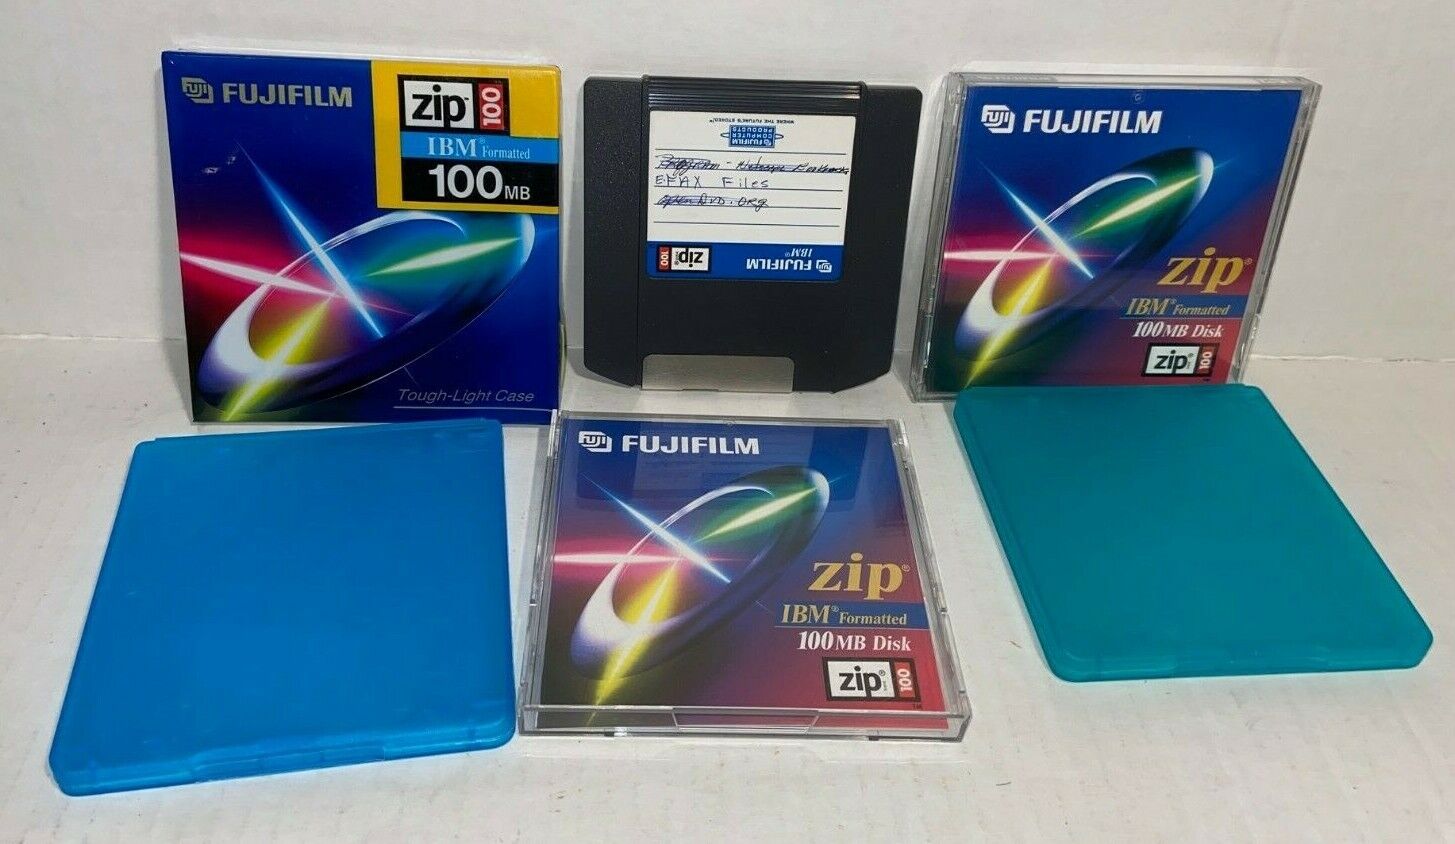 Fujifilm zip 100MB Disk  MIXES ESTATE SALE Lot of 3 DISCS AND TWO BLUE CASES- A2